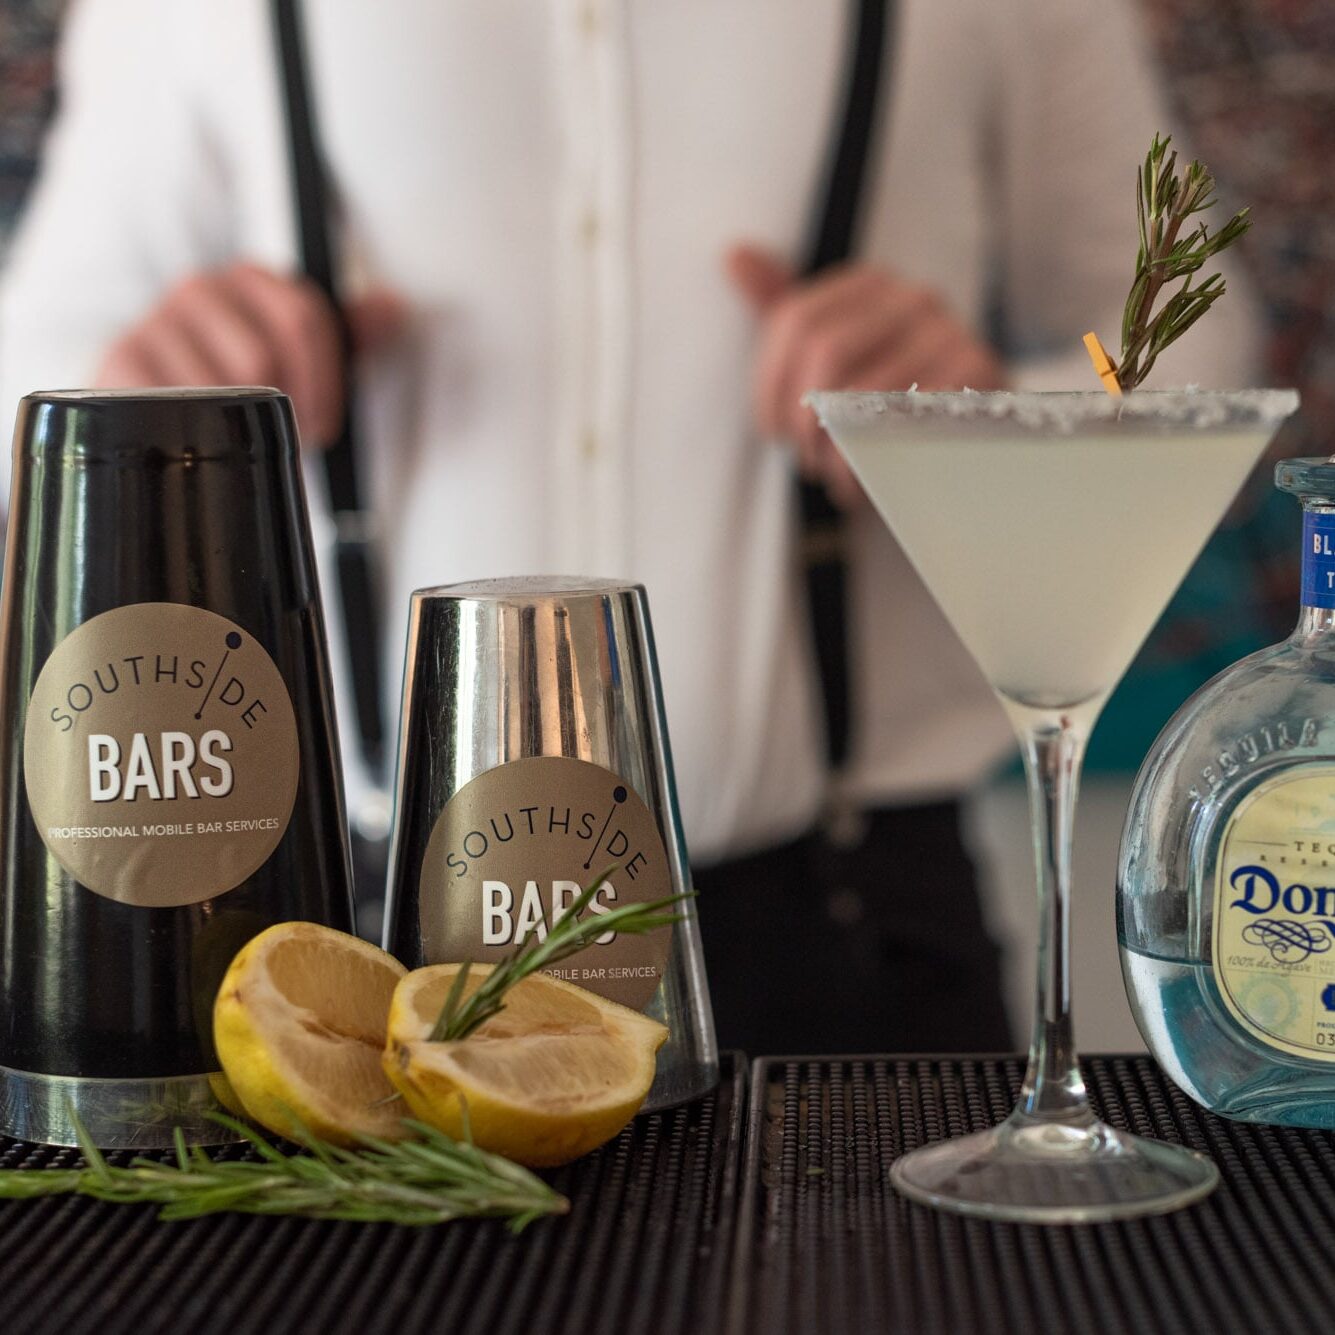 premium cocktail has been made using don julio tequila for a cocktails & drinks packages 